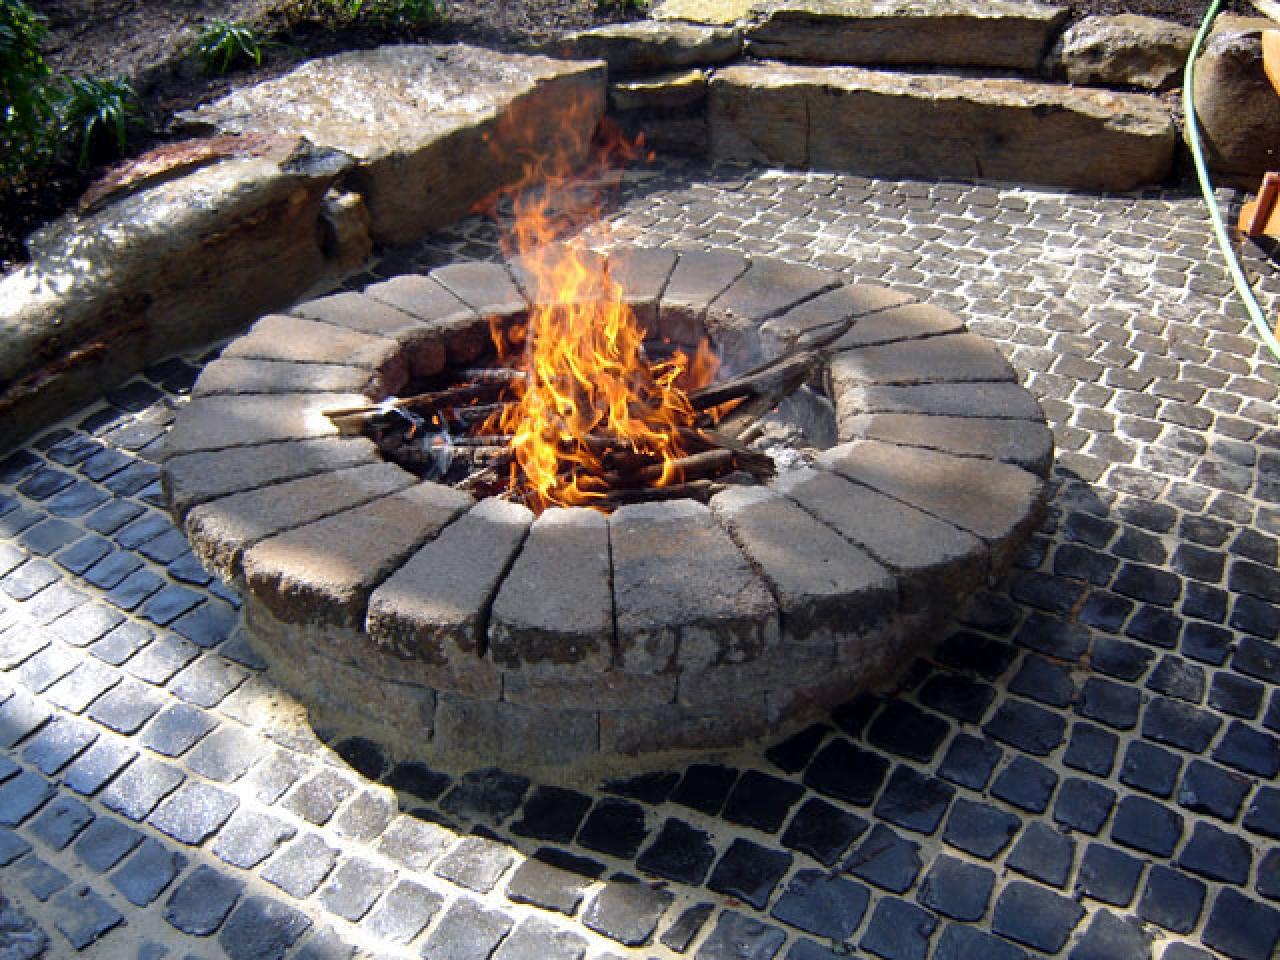 How To Build A Round Stone Fire Pit, How To Make A Fire Pit With Rocks